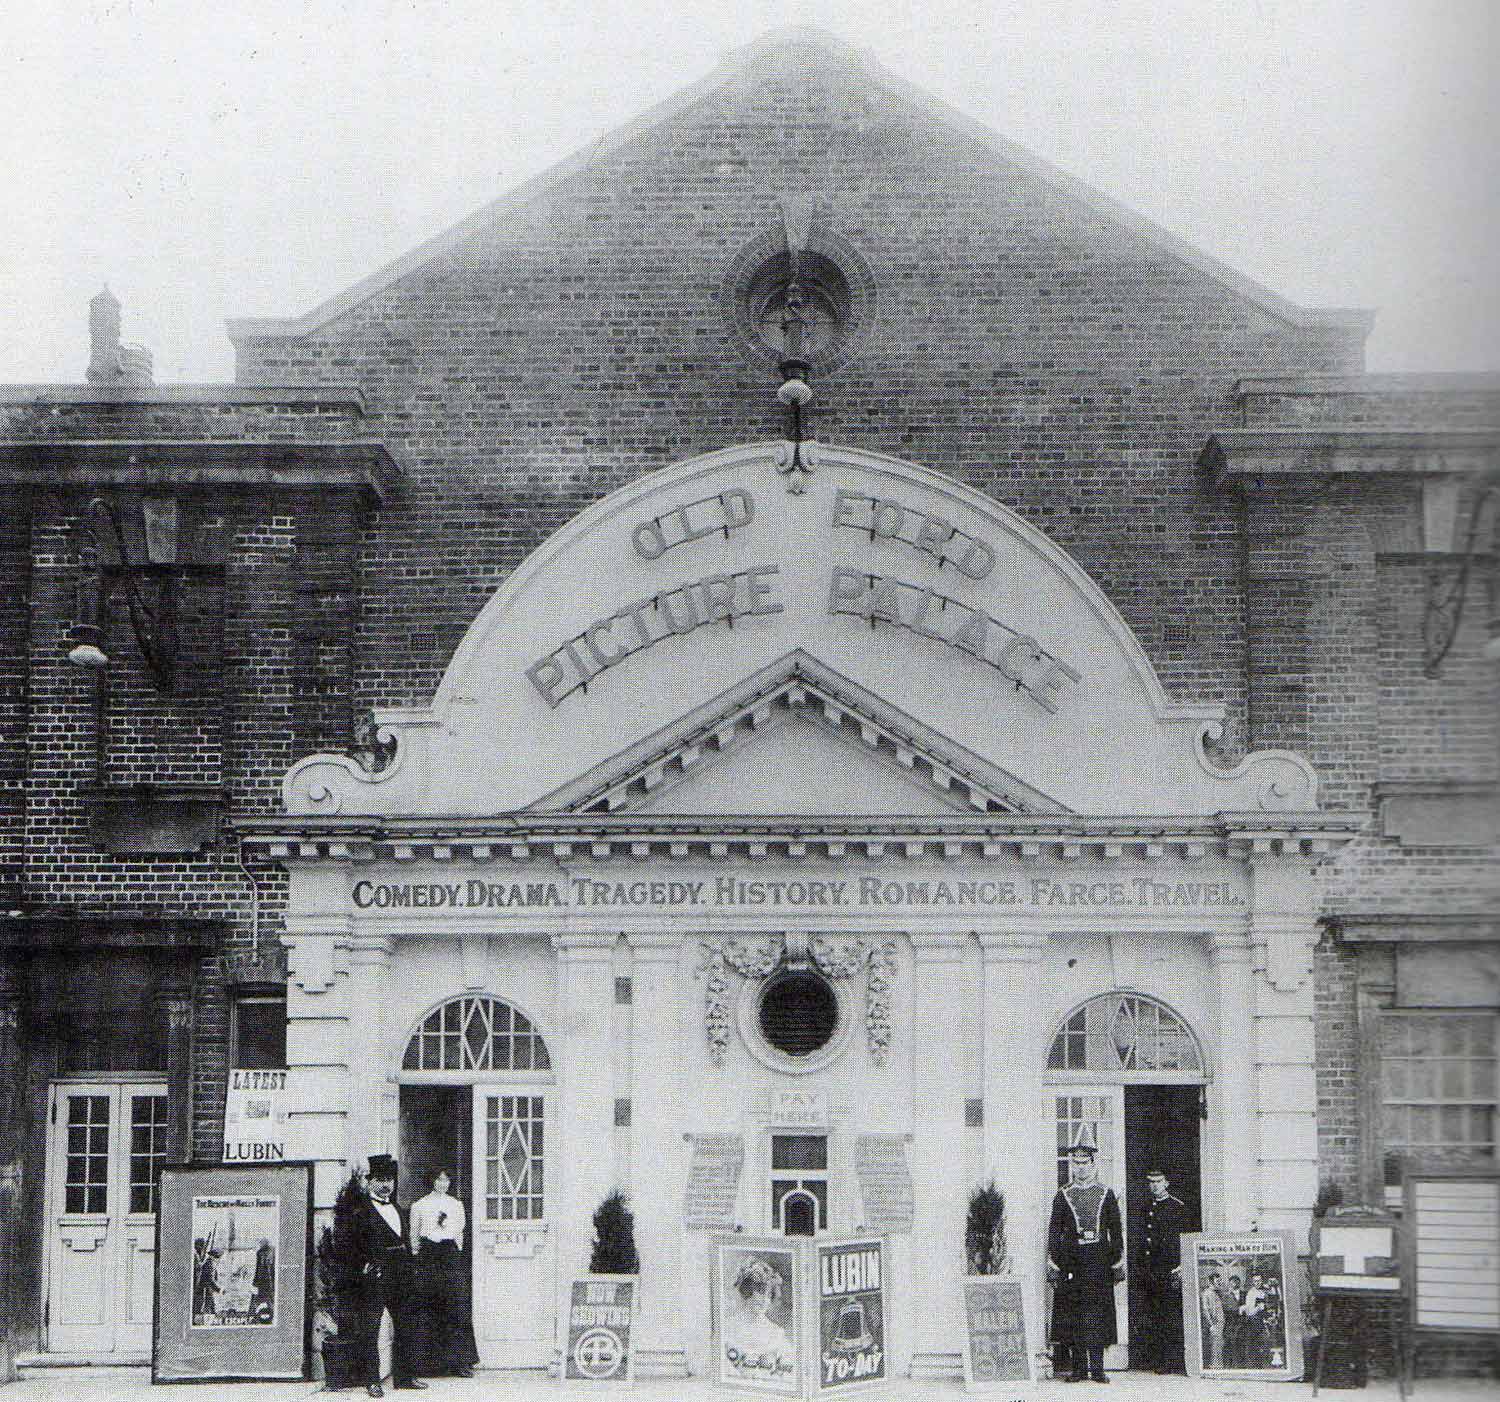 Black and white photograph of the Ritz Cinema in 1897